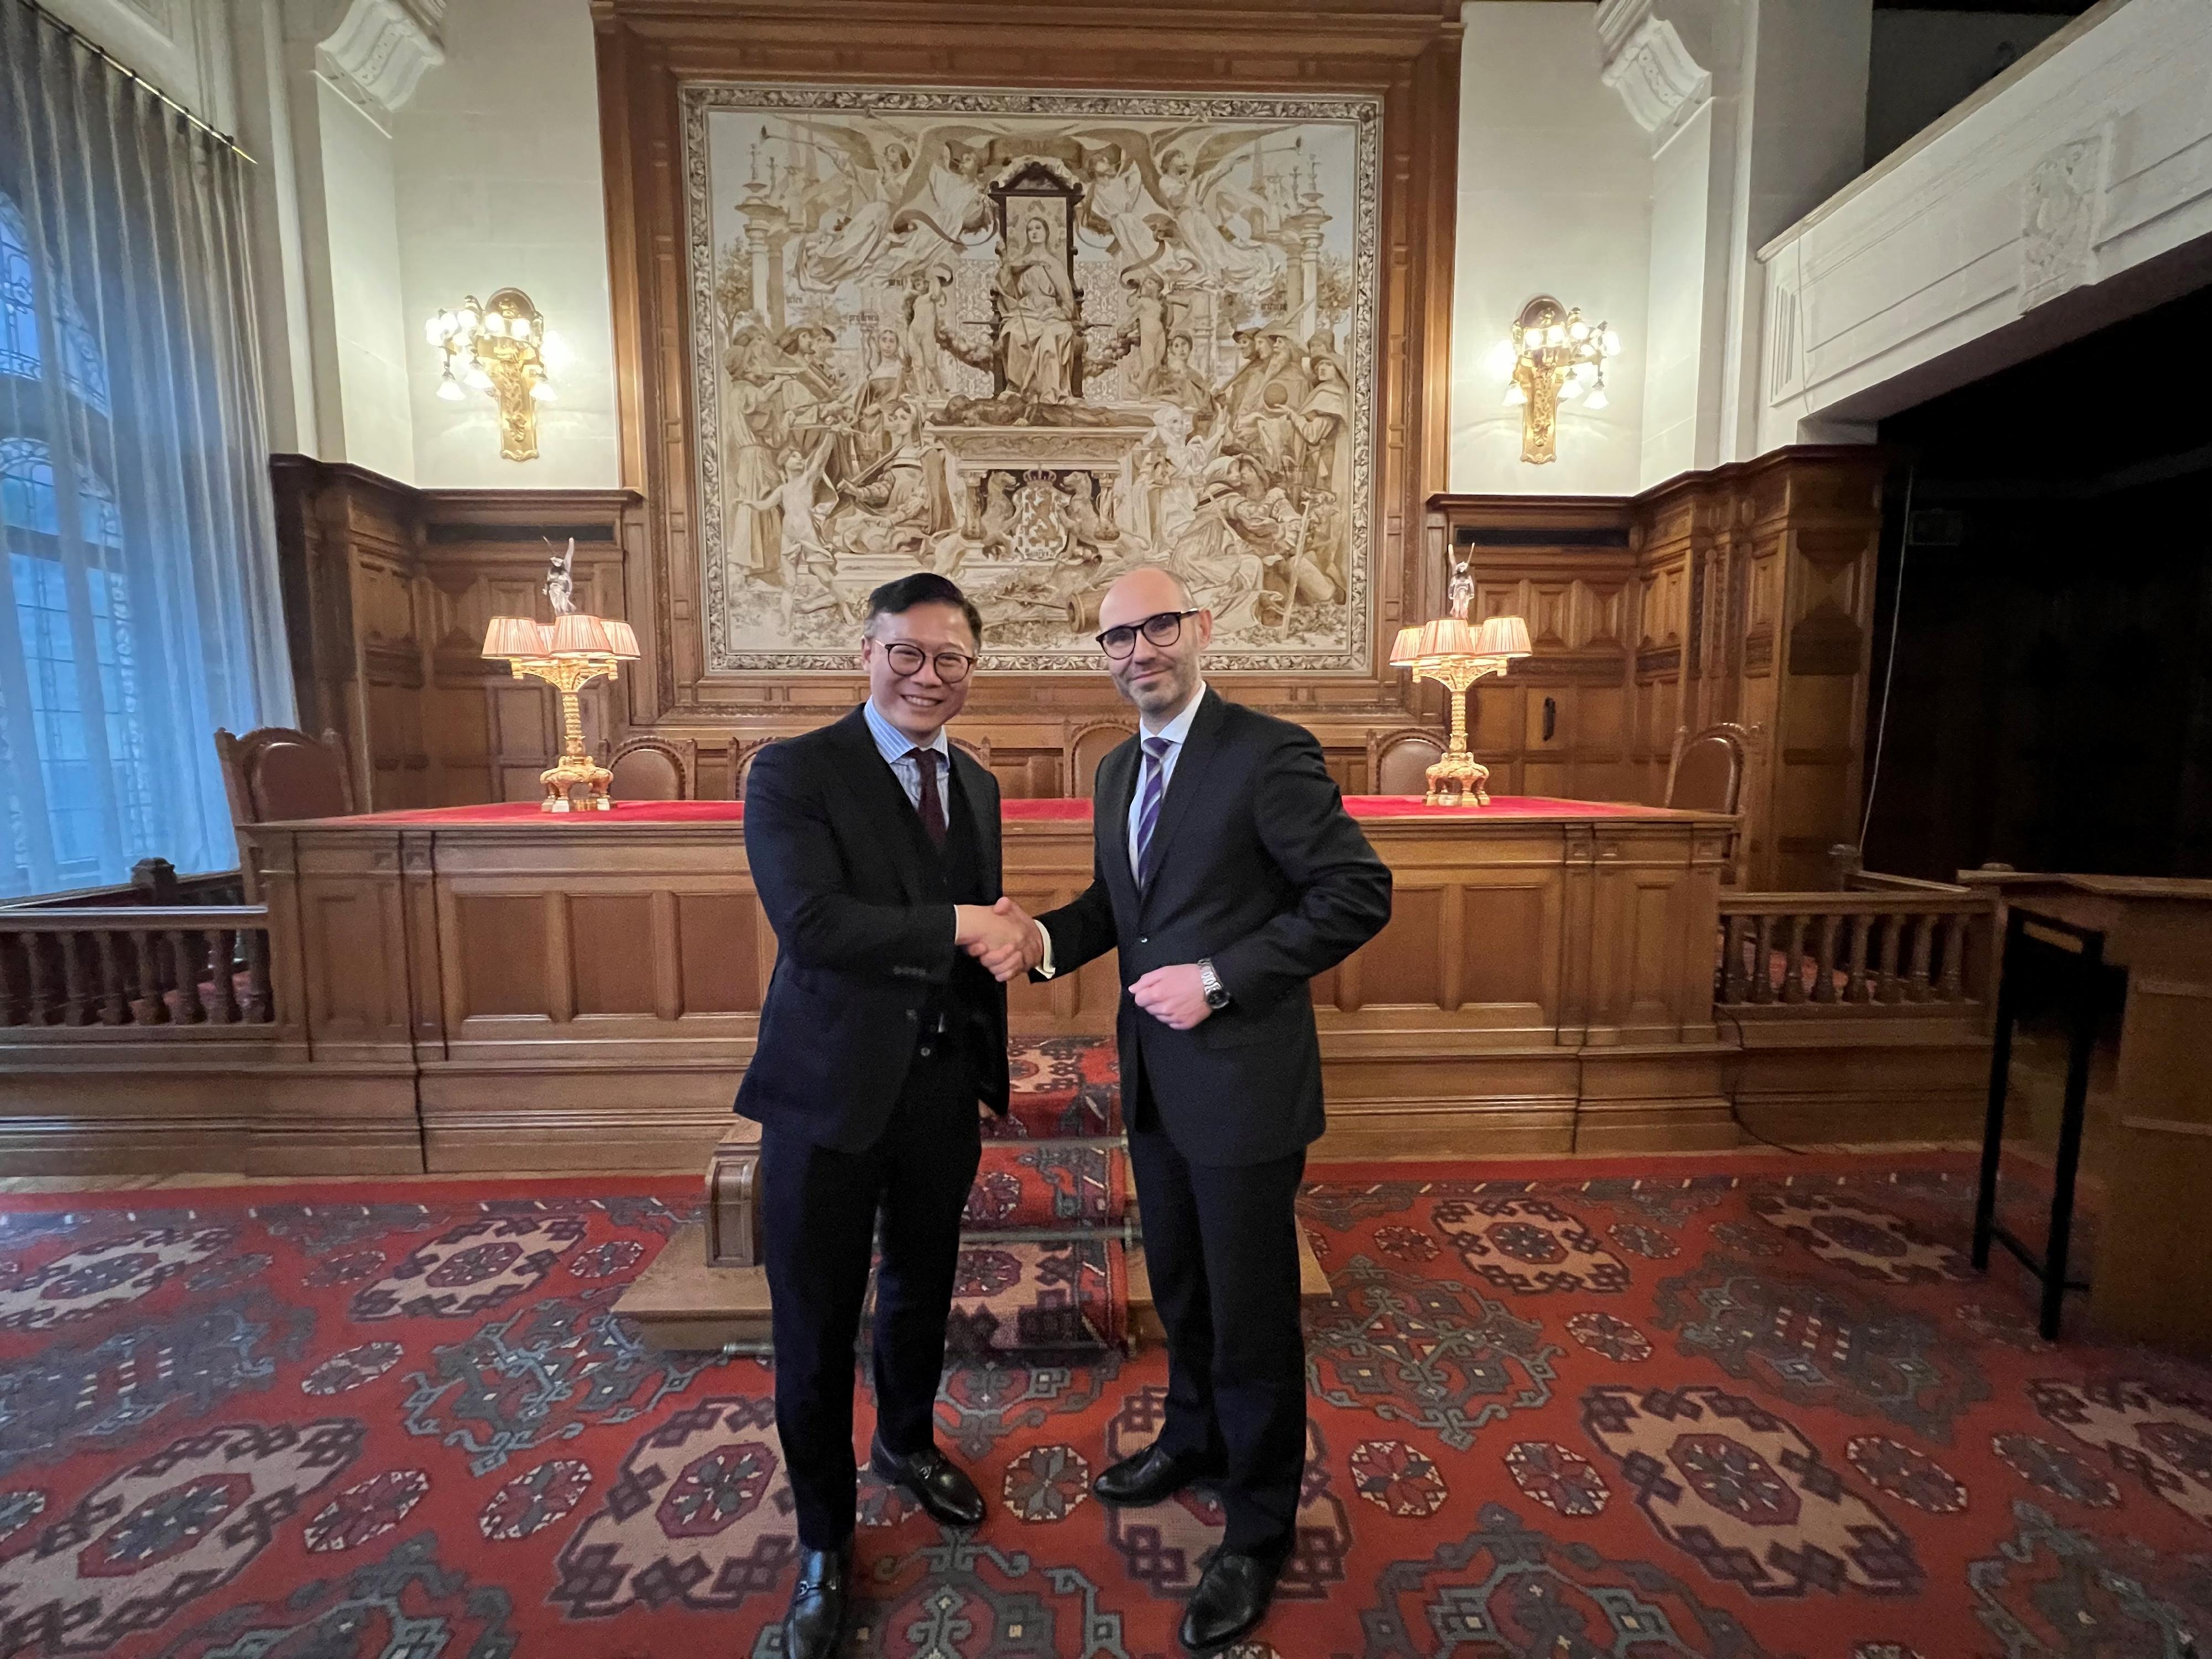 The Deputy Secretary for Justice, Mr Cheung Kwok-kwan (left), and the Secretary-General of the Permanent Court of Arbitration (PCA), Dr Hab Marcin Czepelak (right), were pictured at the PCA in The Hague, the Netherlands, on March 10 (The Hague time). 
